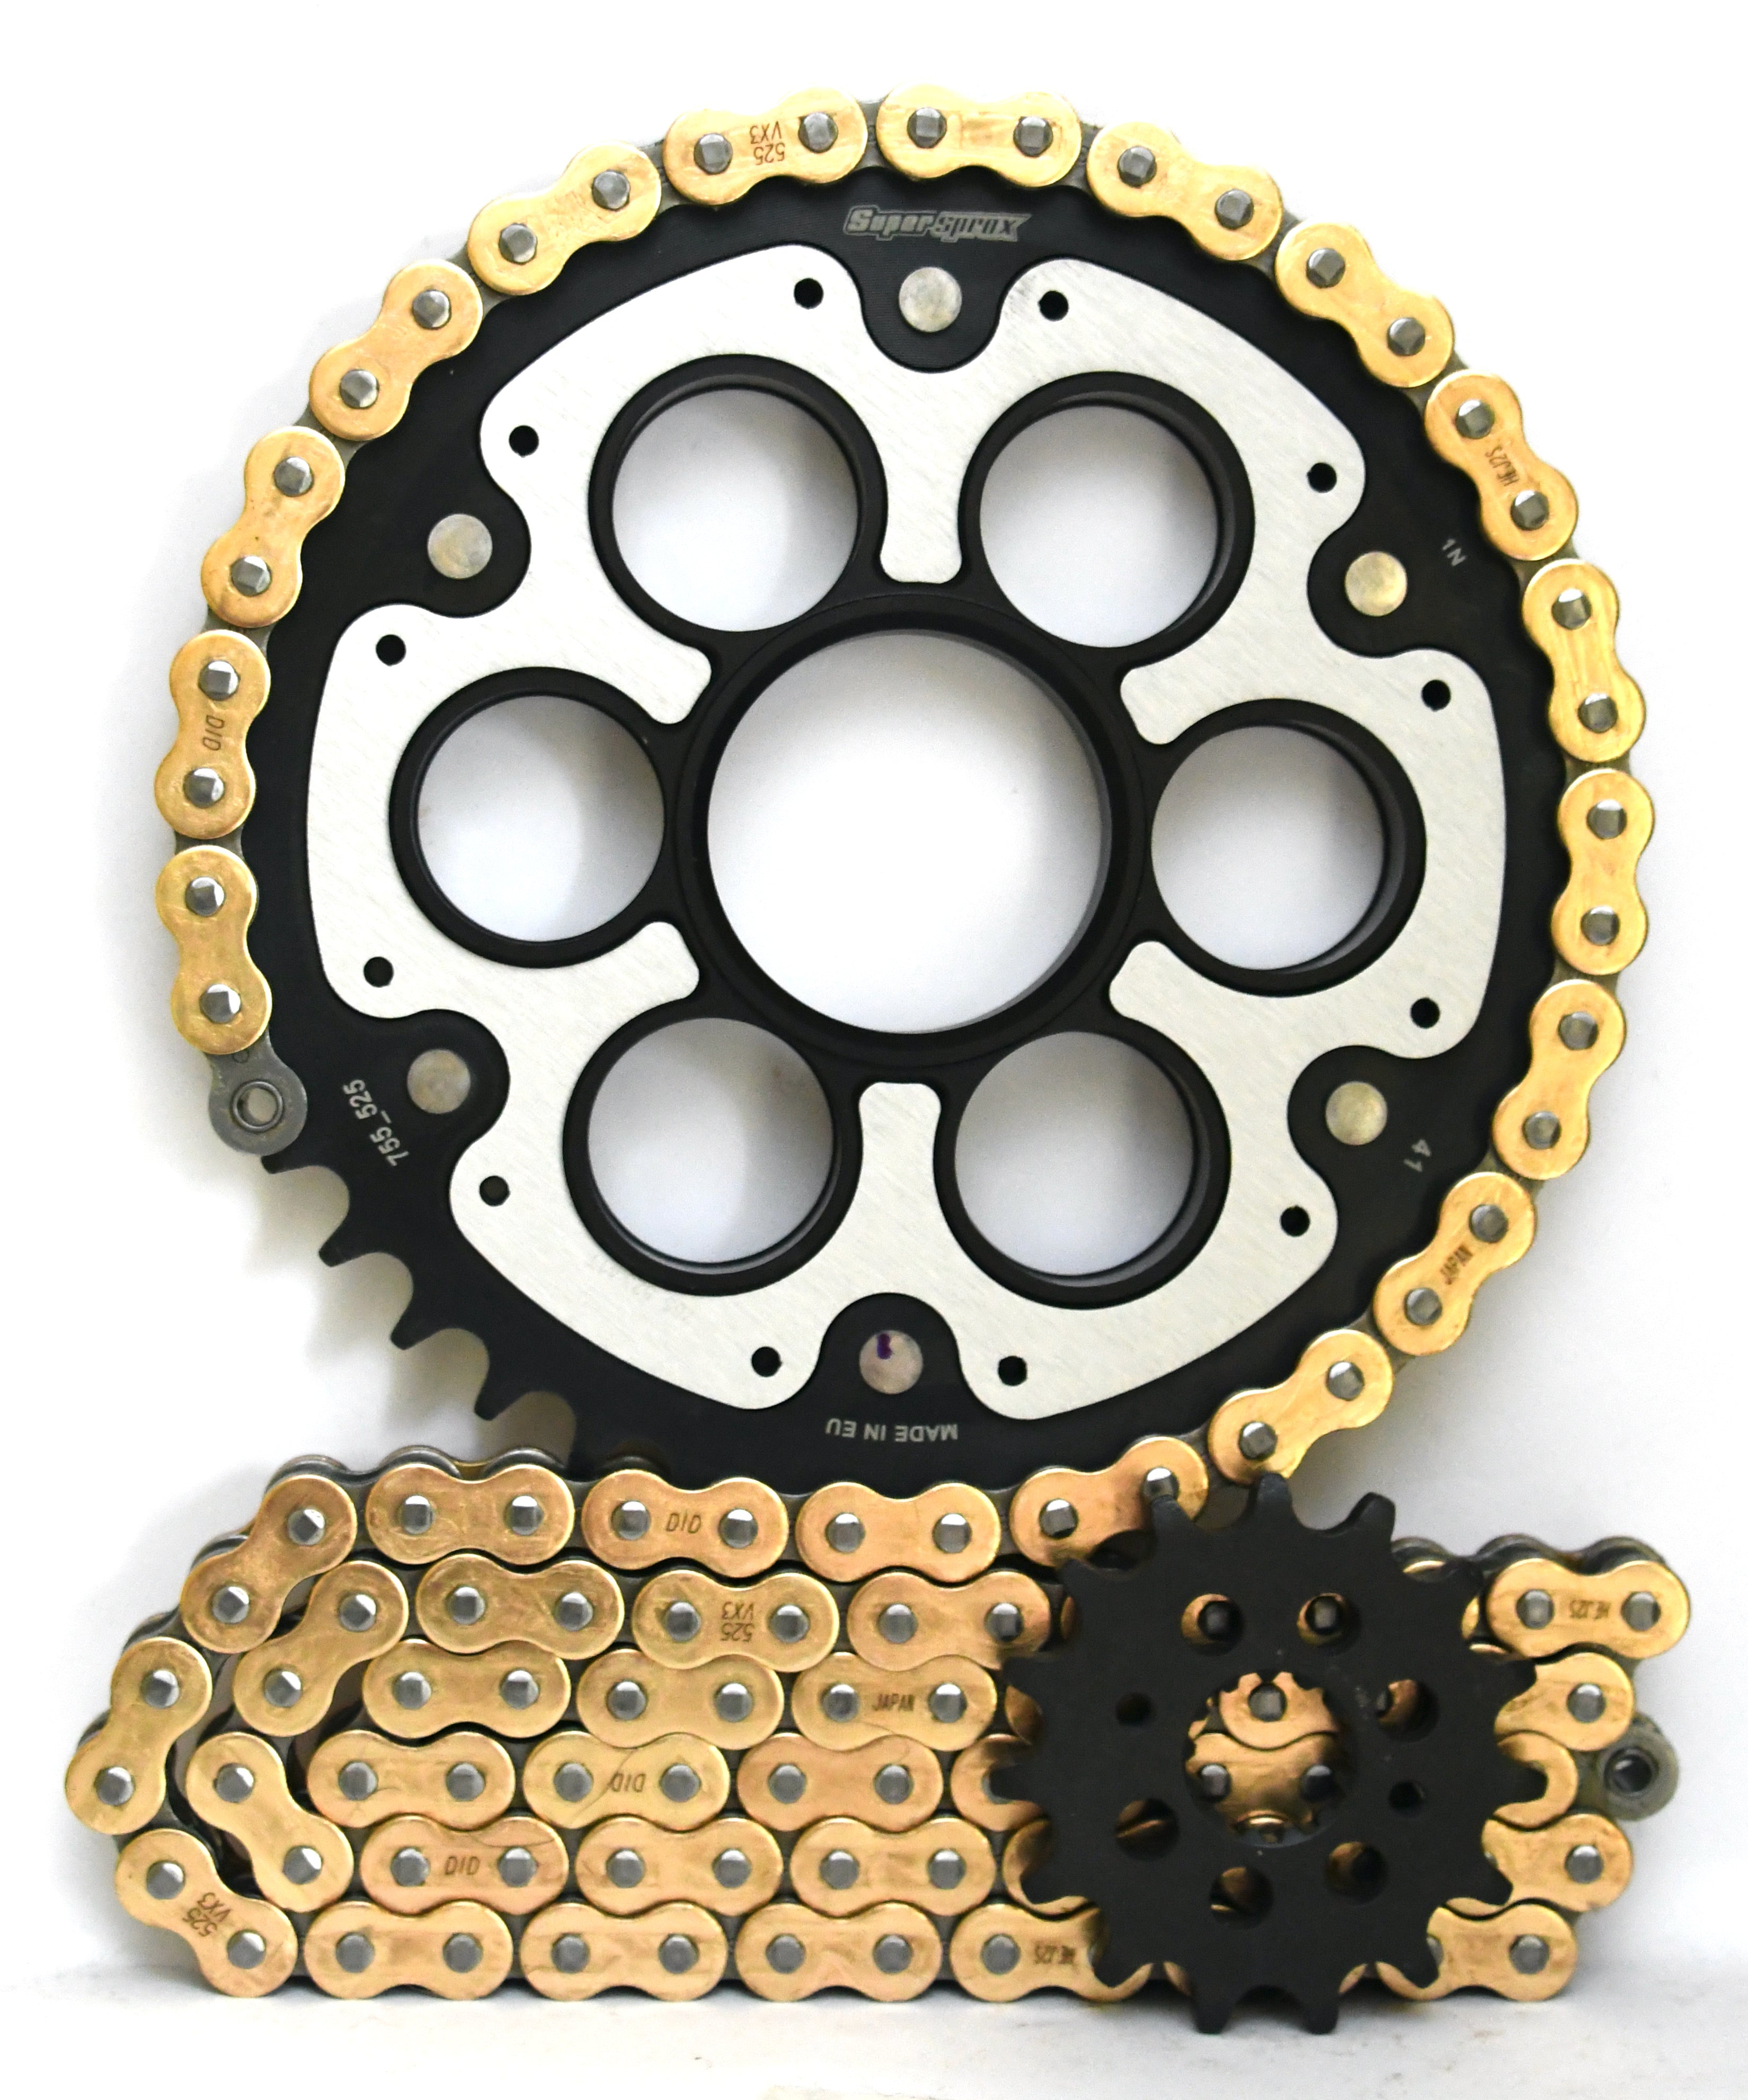 Supersprox Chain & Sprocket Kit for Ducati Panigale V2 2020> - Standard Gearing